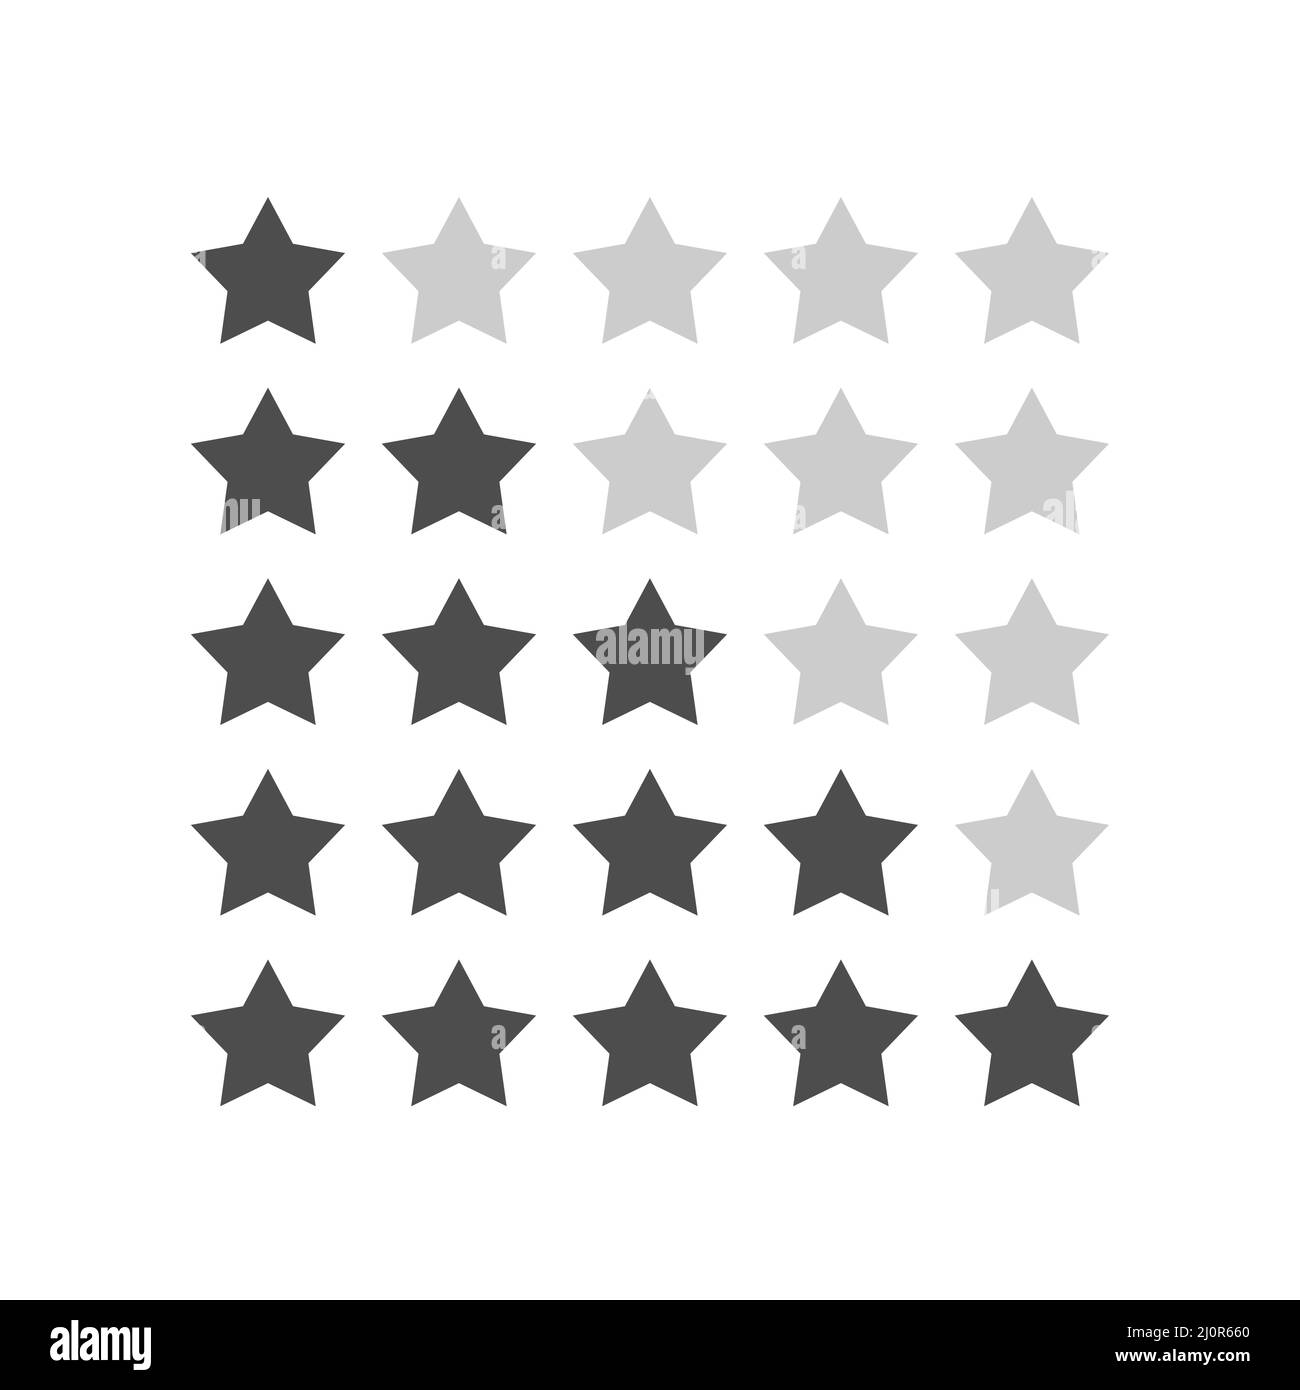 Set of 5 stars on a white background. Stock Vector